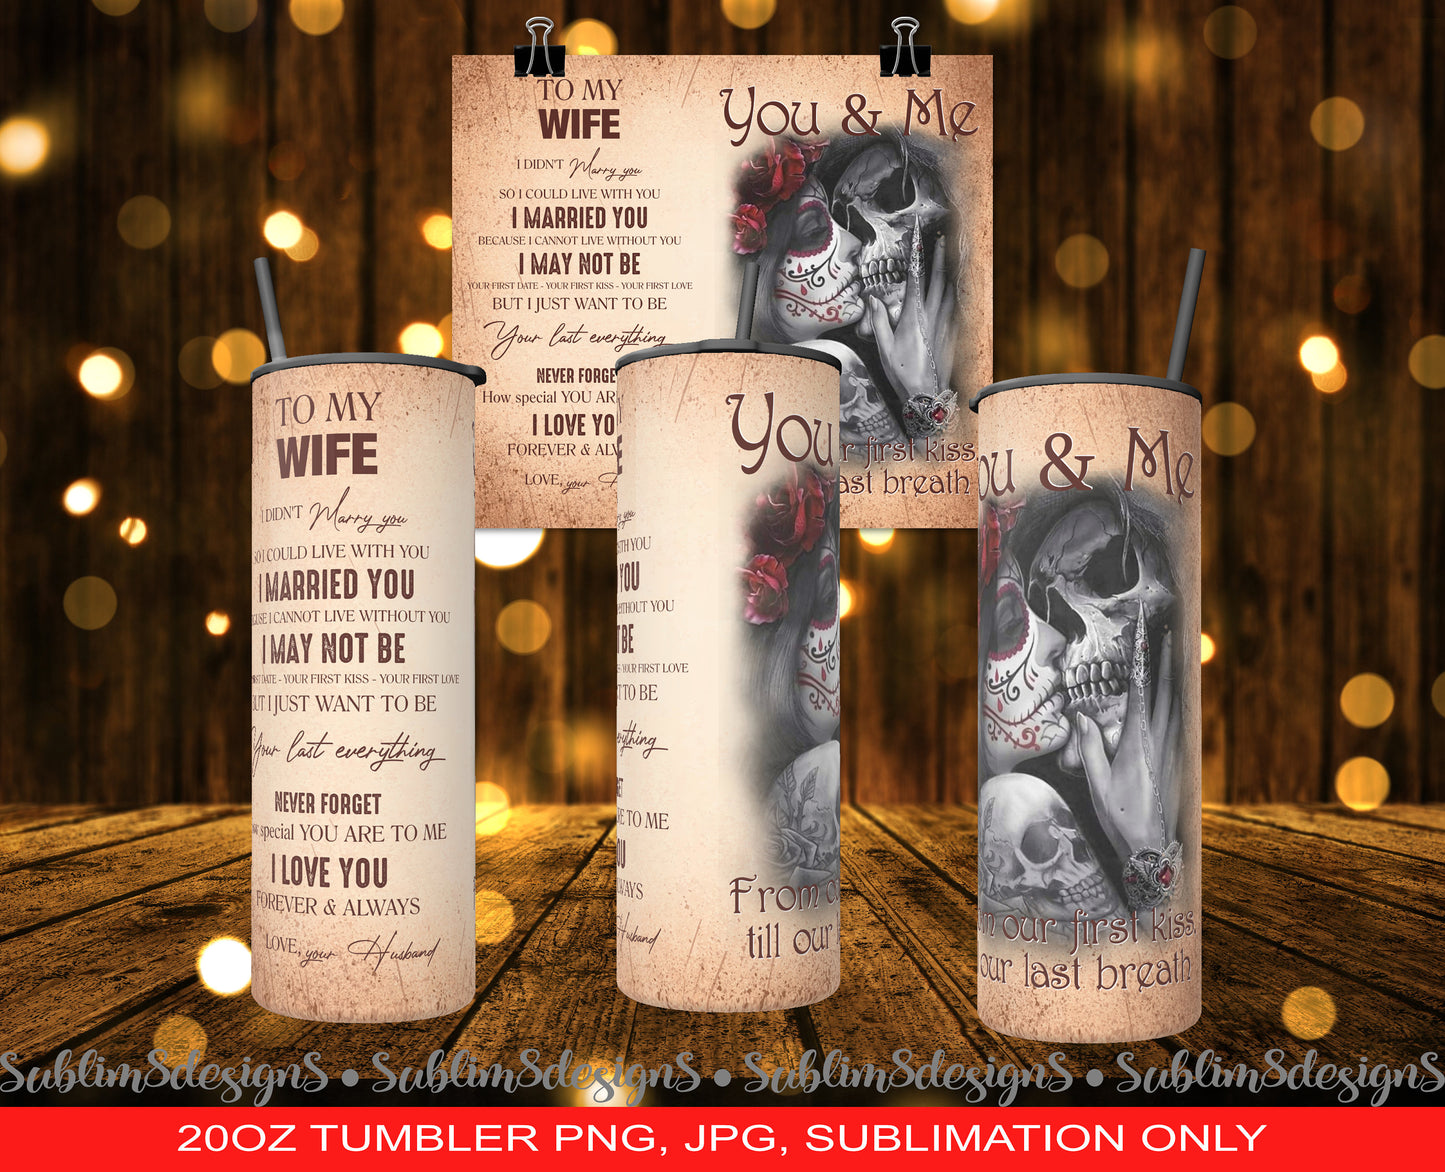 To My Wife, You& Me. From our first kiss, till our last breath 20oz Tumbler Sublimation Design PNG and JPG